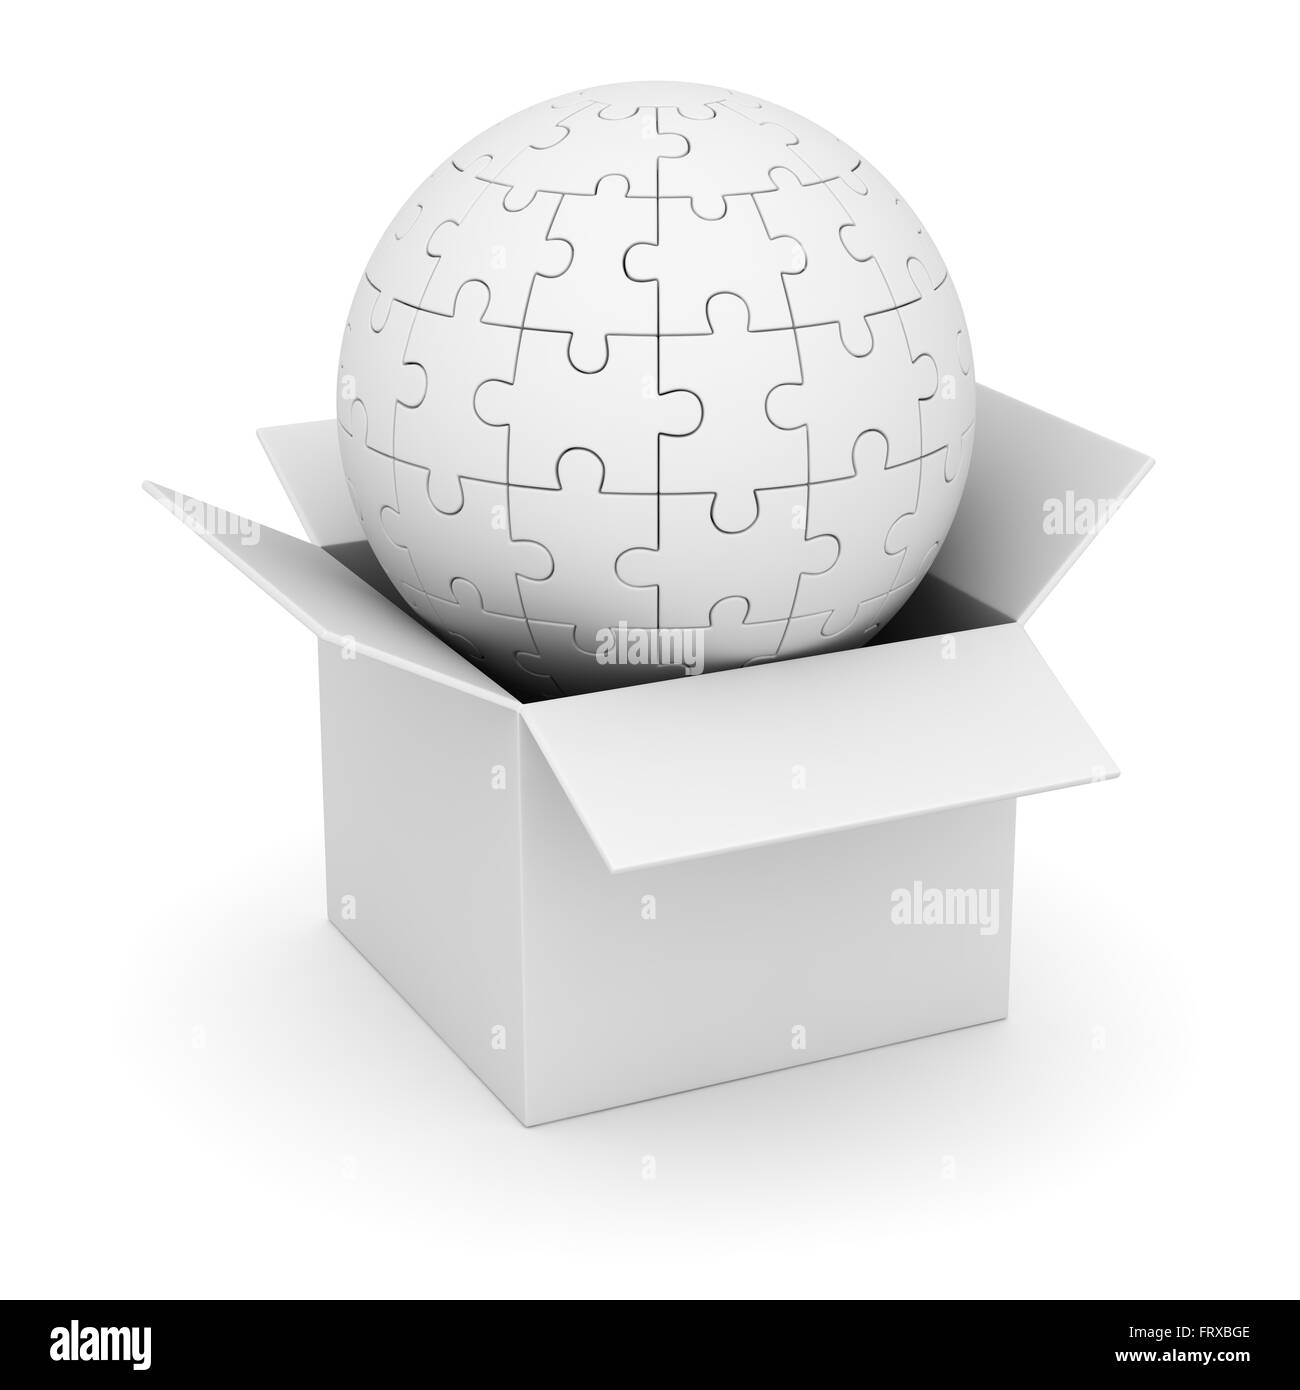 White Box and Sphere Puzzle Stock Photo